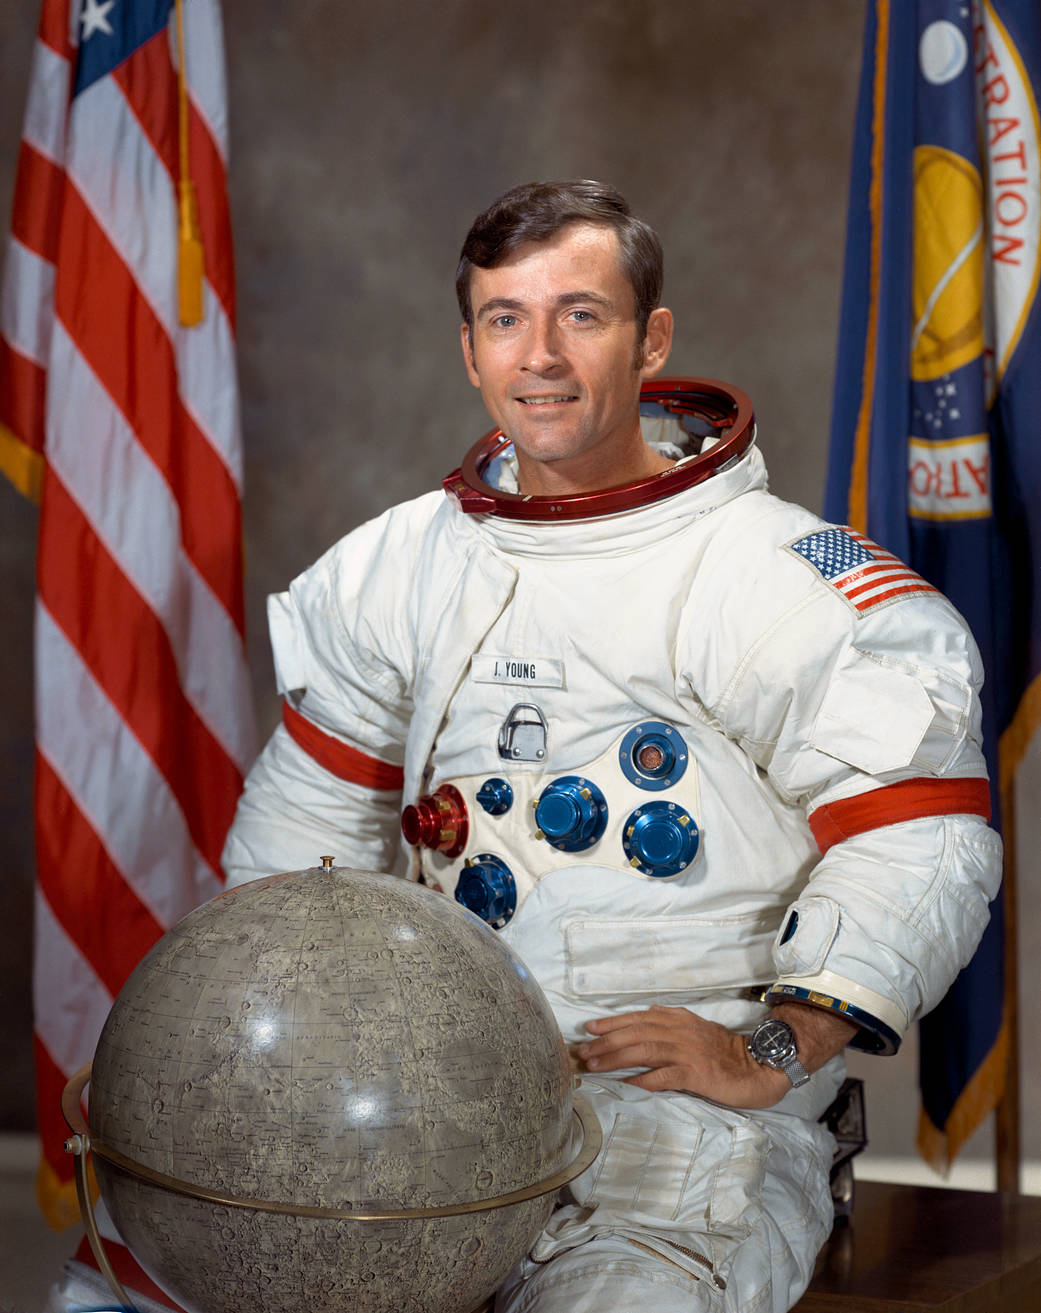 Official portrait of astronaut John Young with globe and American flag